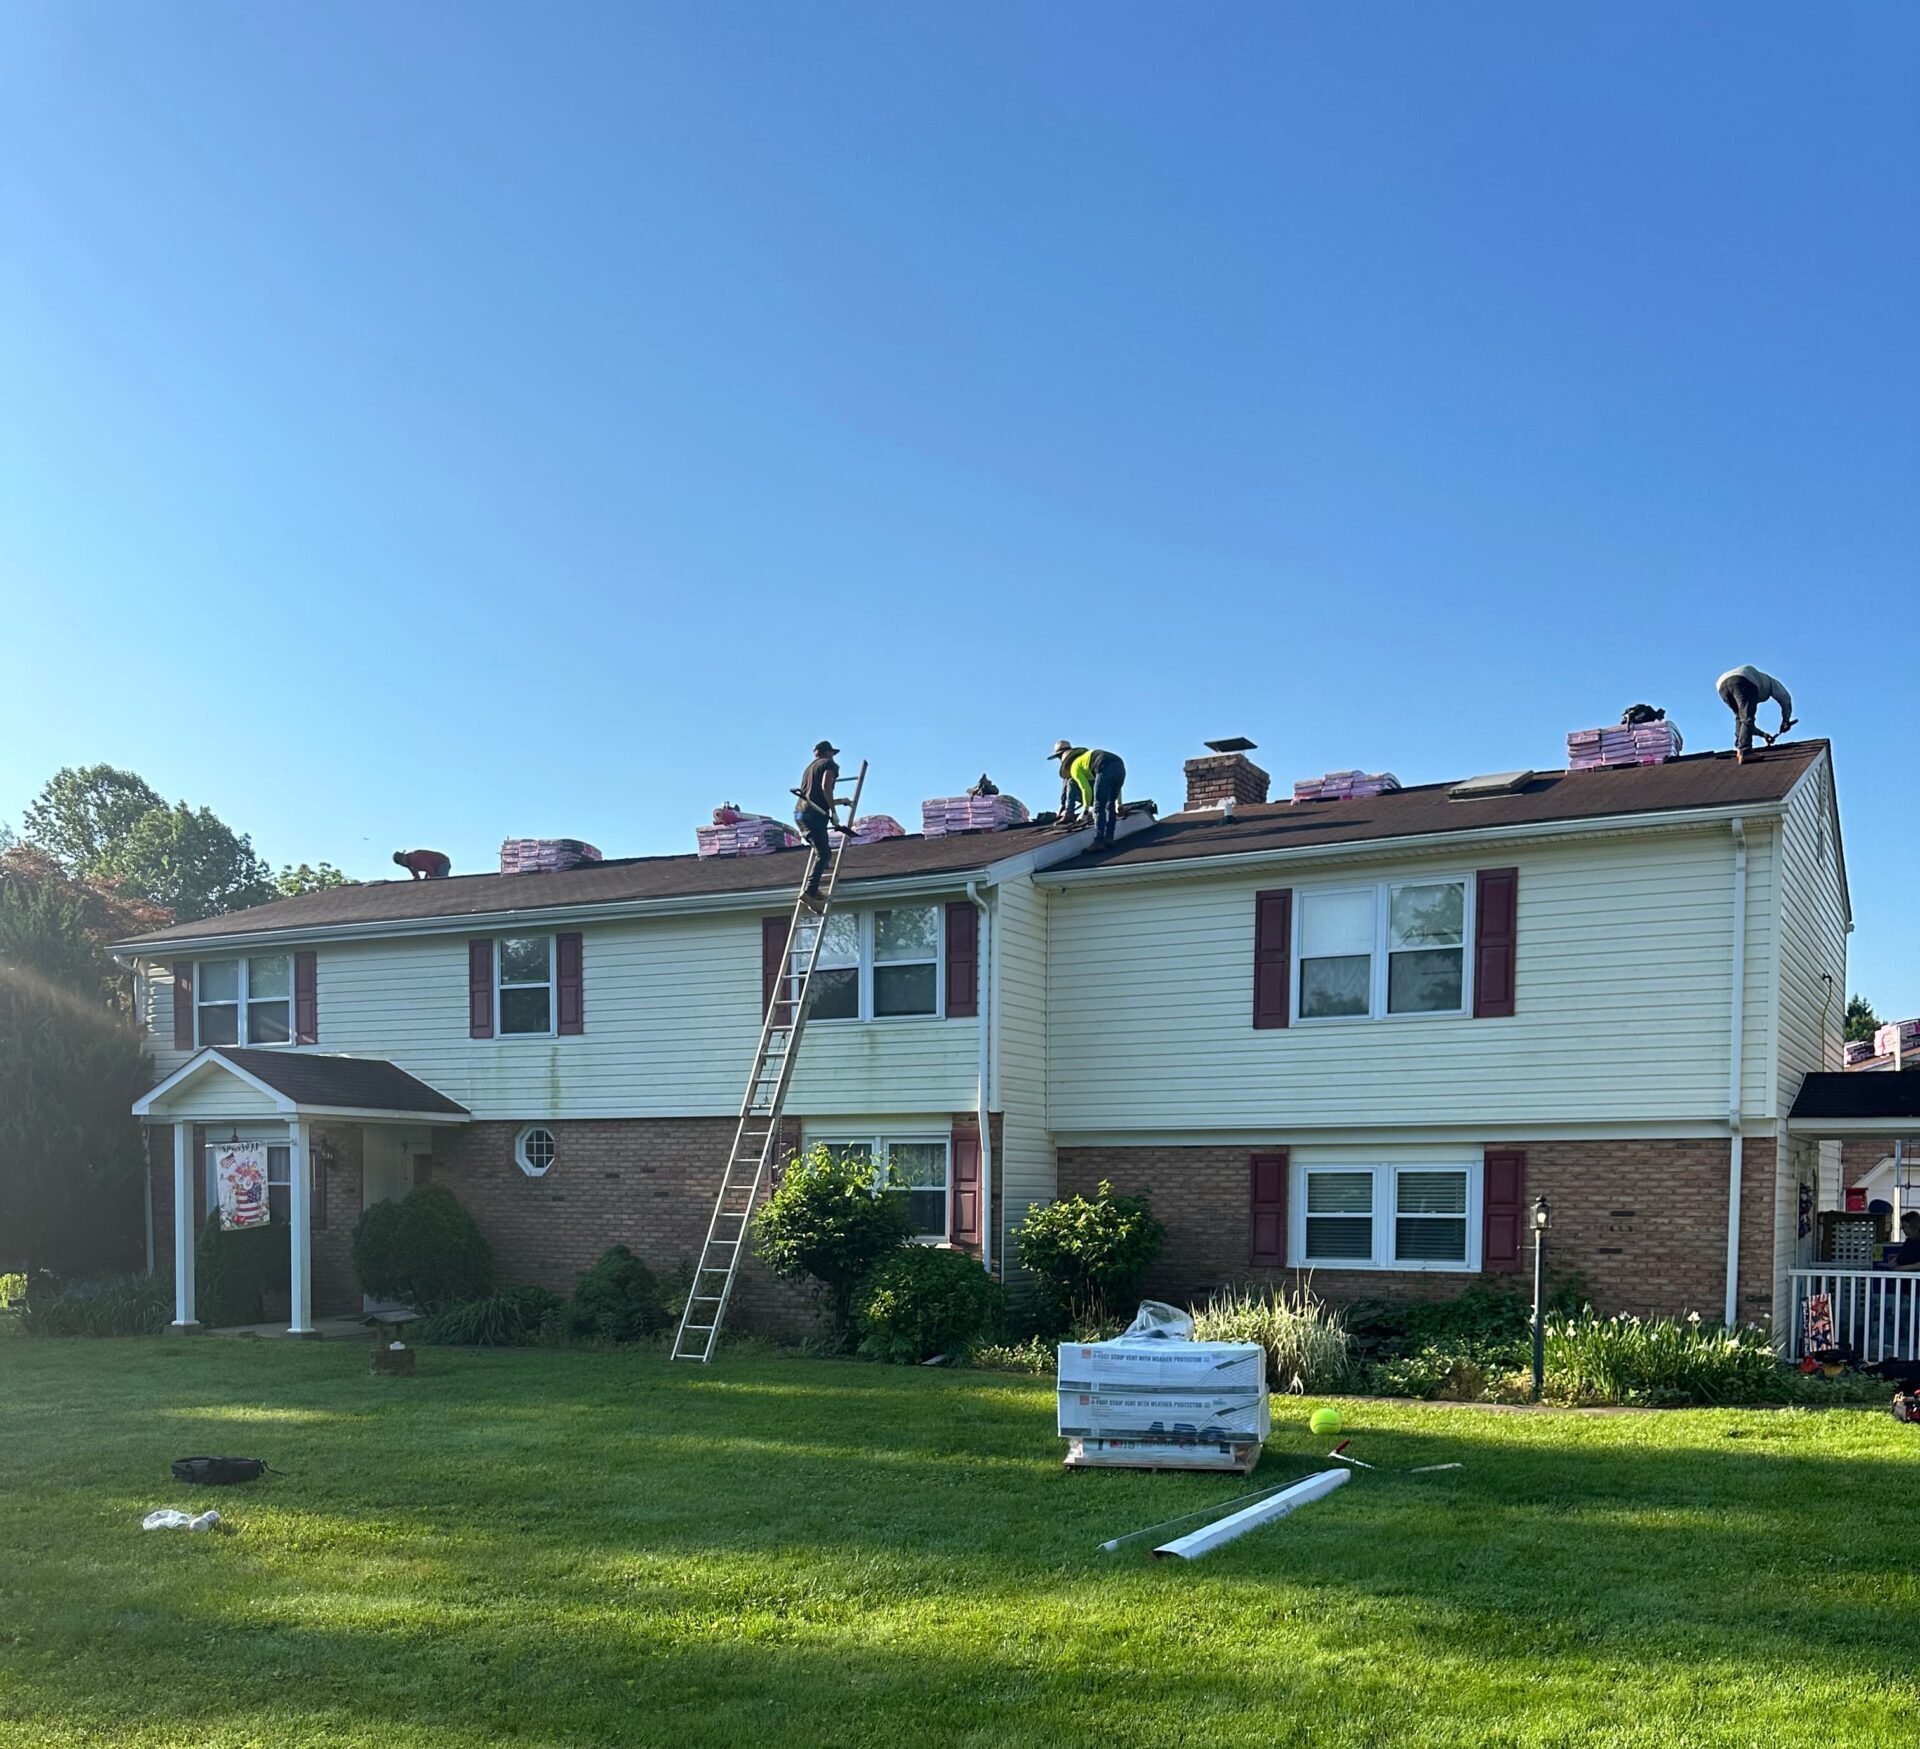 Bel Air North Residential Roofing Services